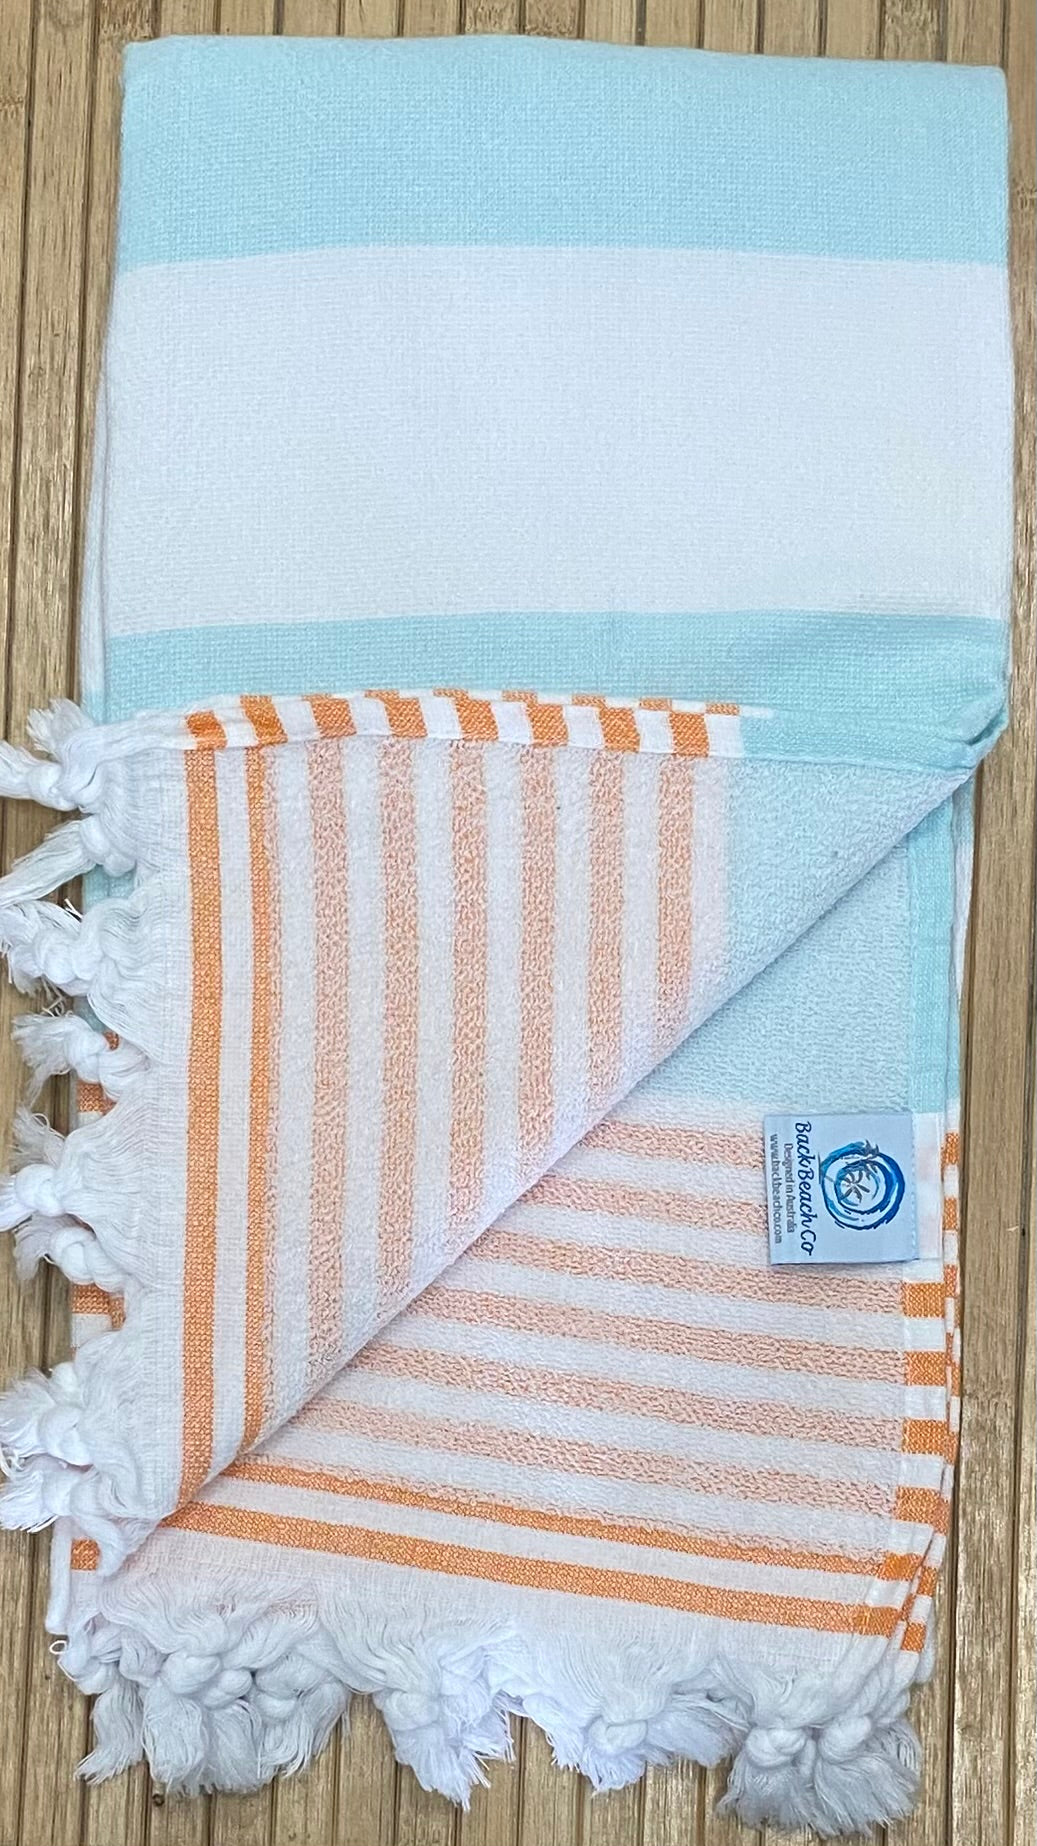 Turkish Towel with Terry Backing - Blue, Orange and white stripe